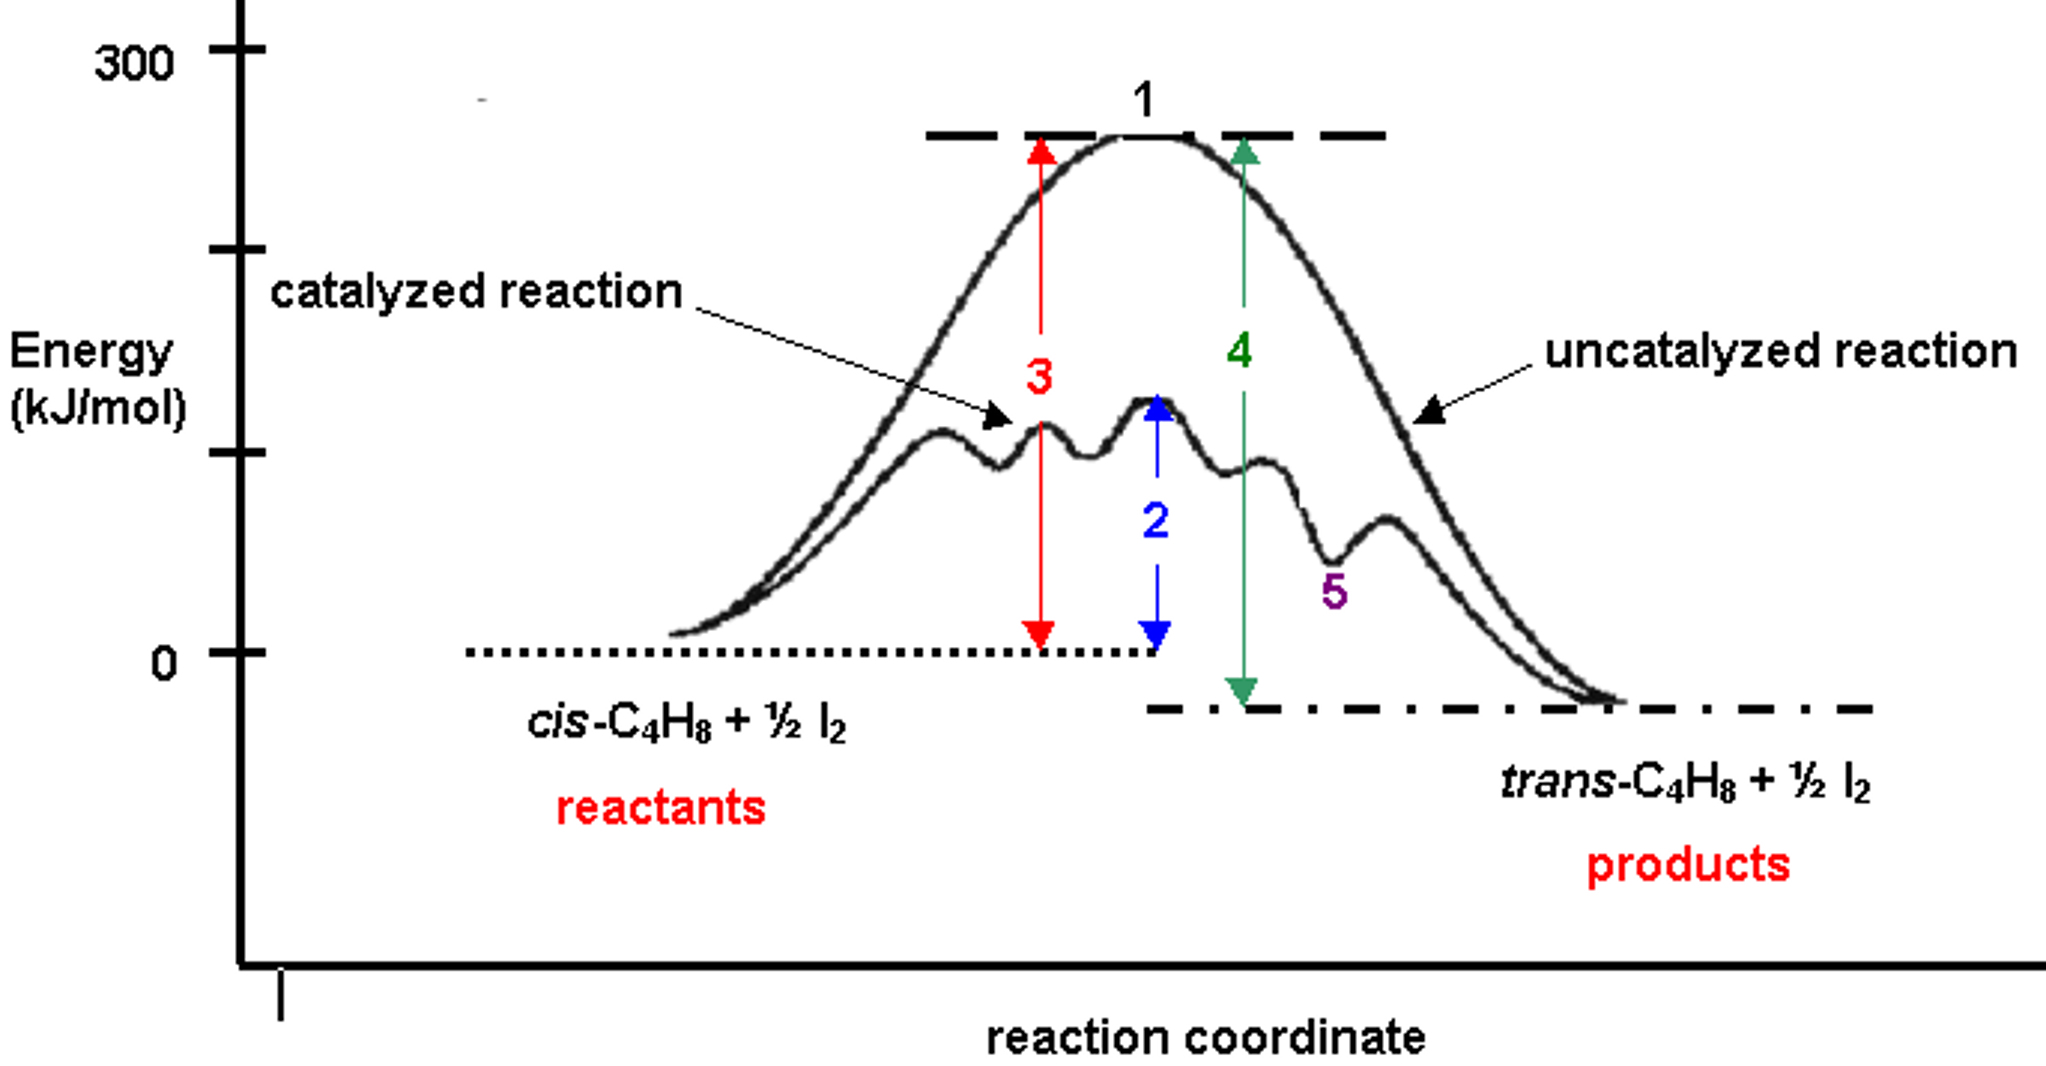 (Solved) The diagram shown above shows the reaction profile for the